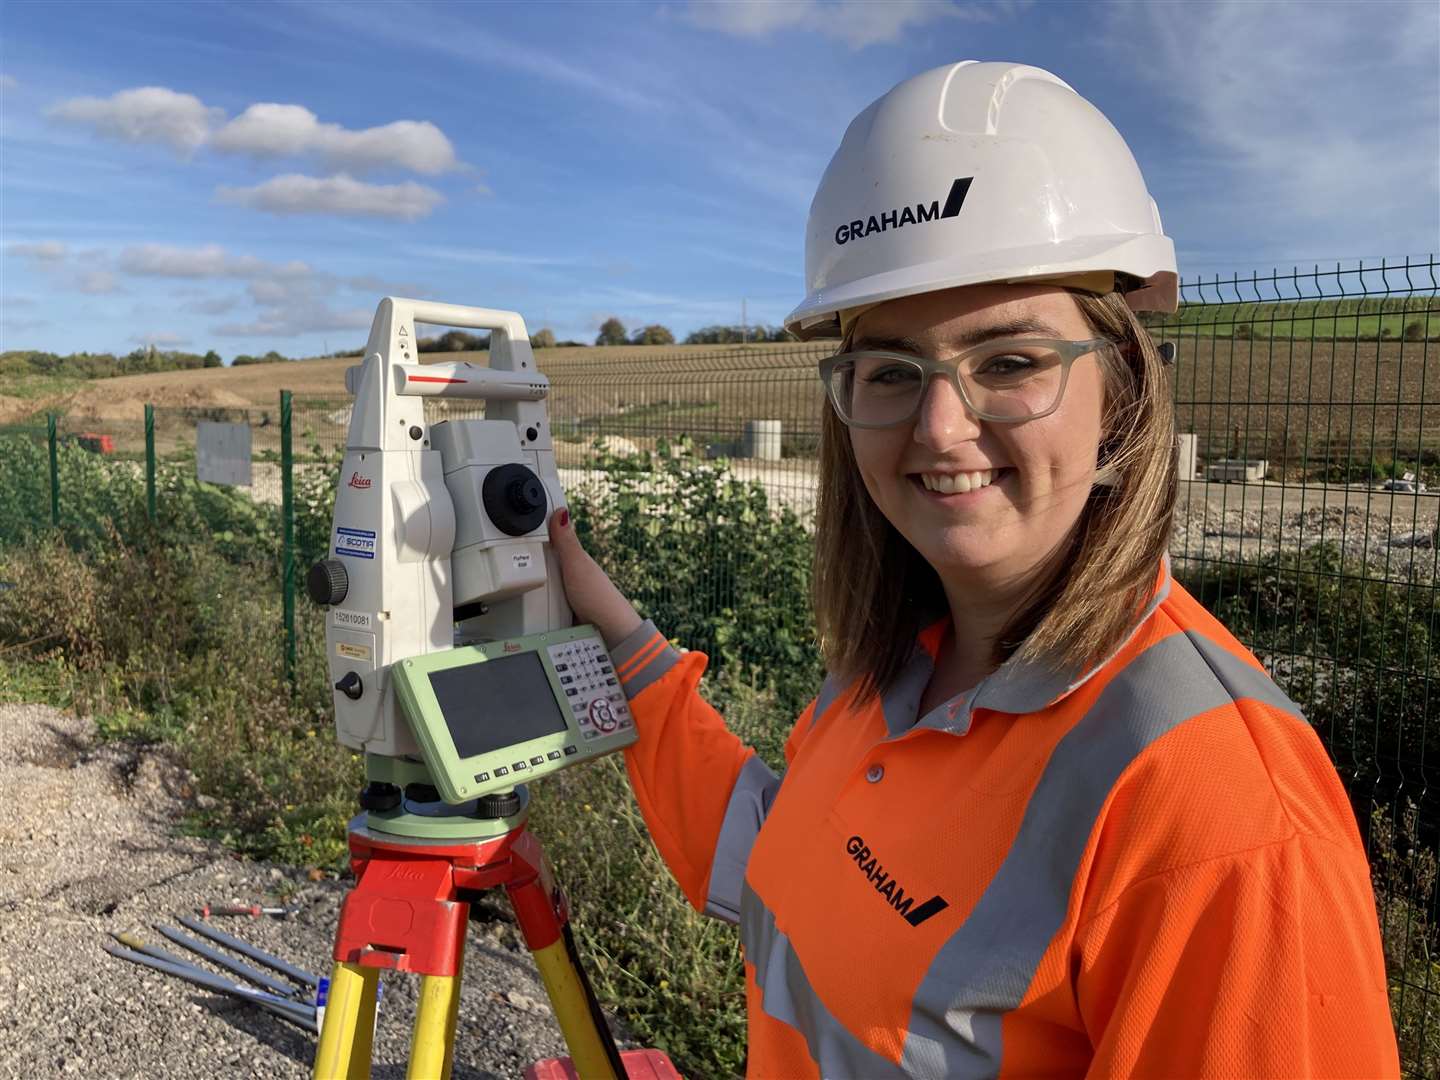 Engineering design student Lucy Turnbull, 20, from Bristol University, gets some practical experience on the M2 A249 construction site at Stockbury. Picture: John Nurden (60444909)